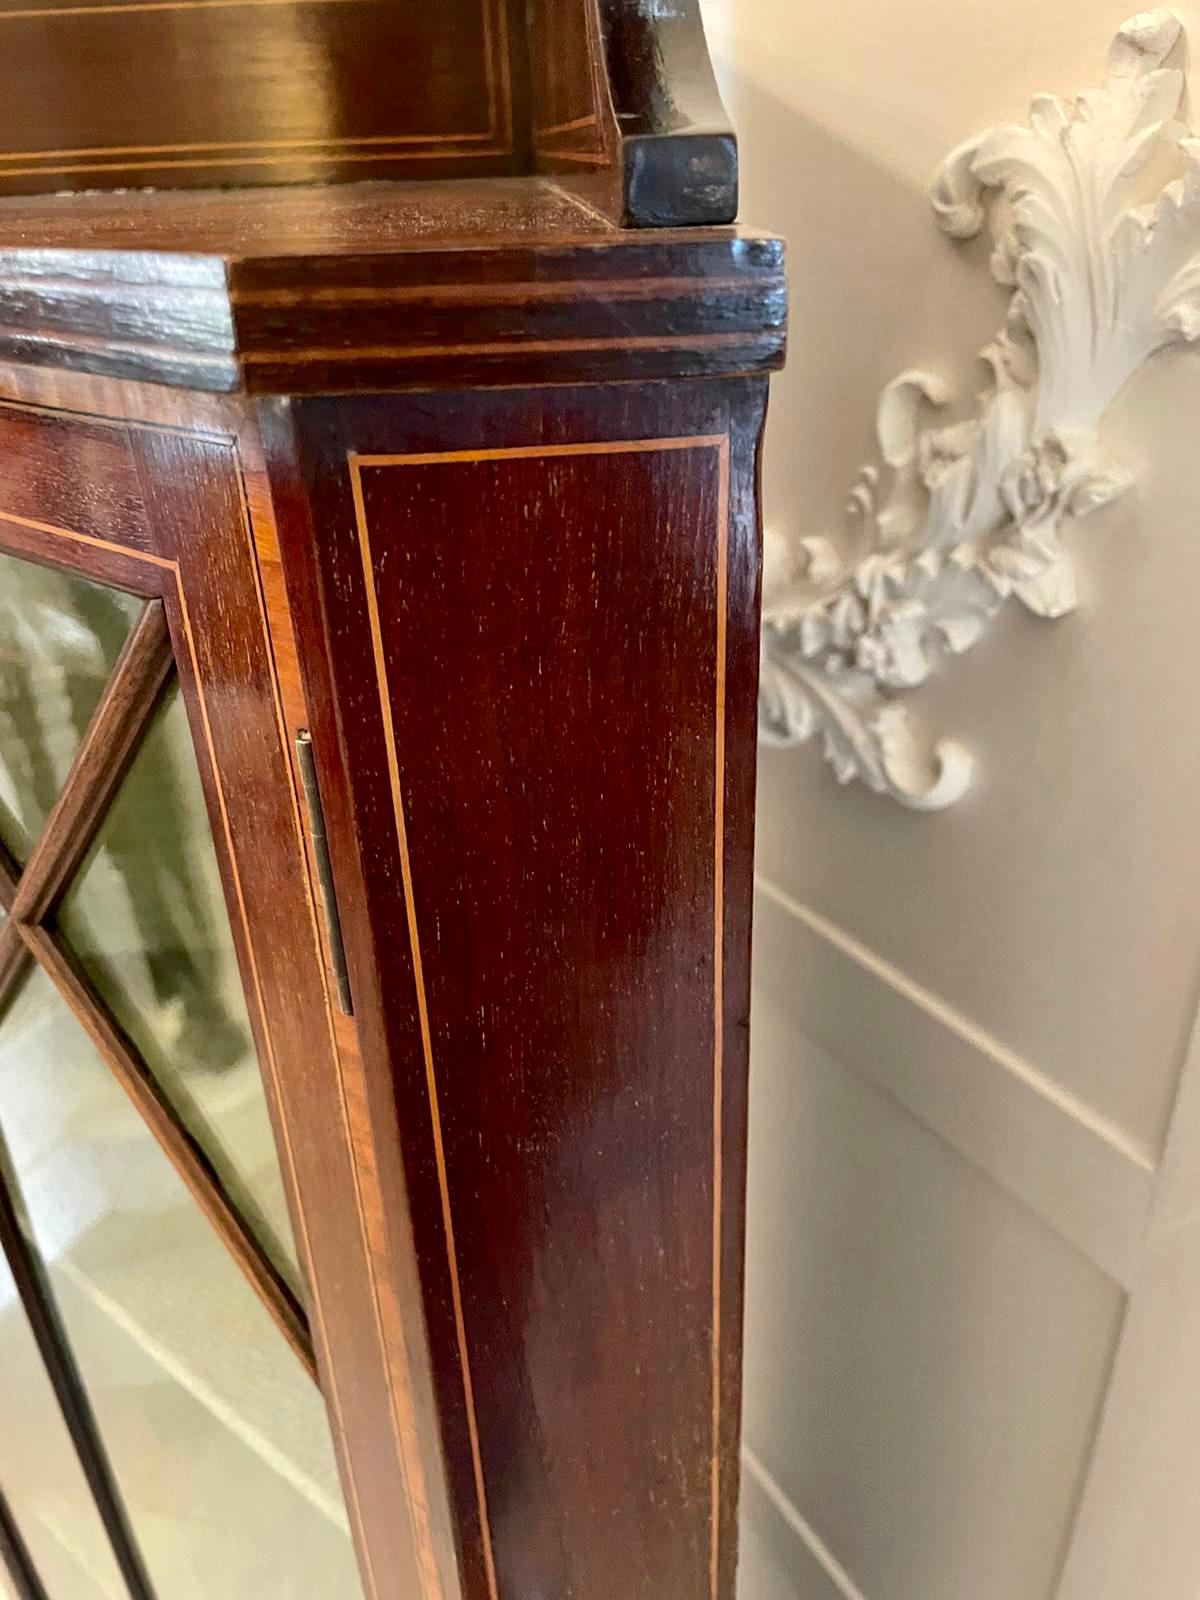 Antique Edwardian inlaid mahogany corner display cabinet having a mahogany gallery top with satinwood inlay, single inlaid mahogany astragal glazed door opening to reveal two shelves standing on shaped spade legs with satinwood stringing

A